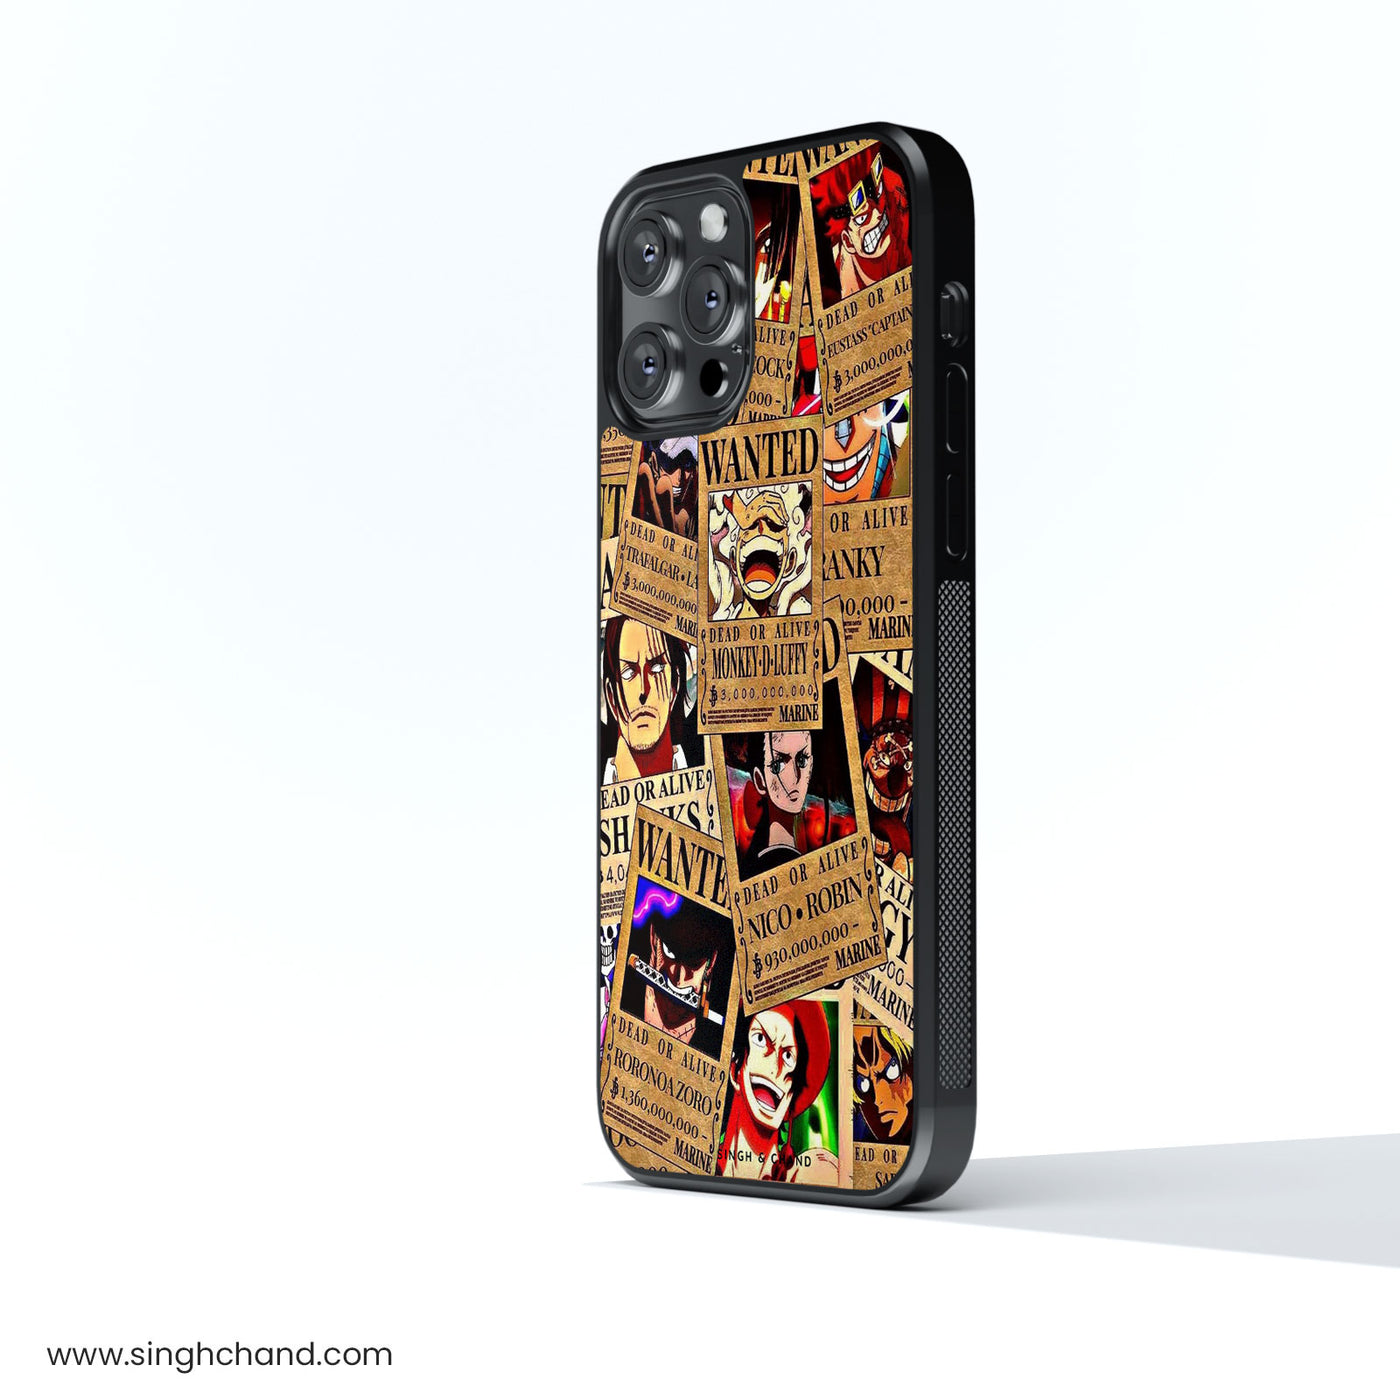 Wanted Posters One Piece Anime Glass Phone Case